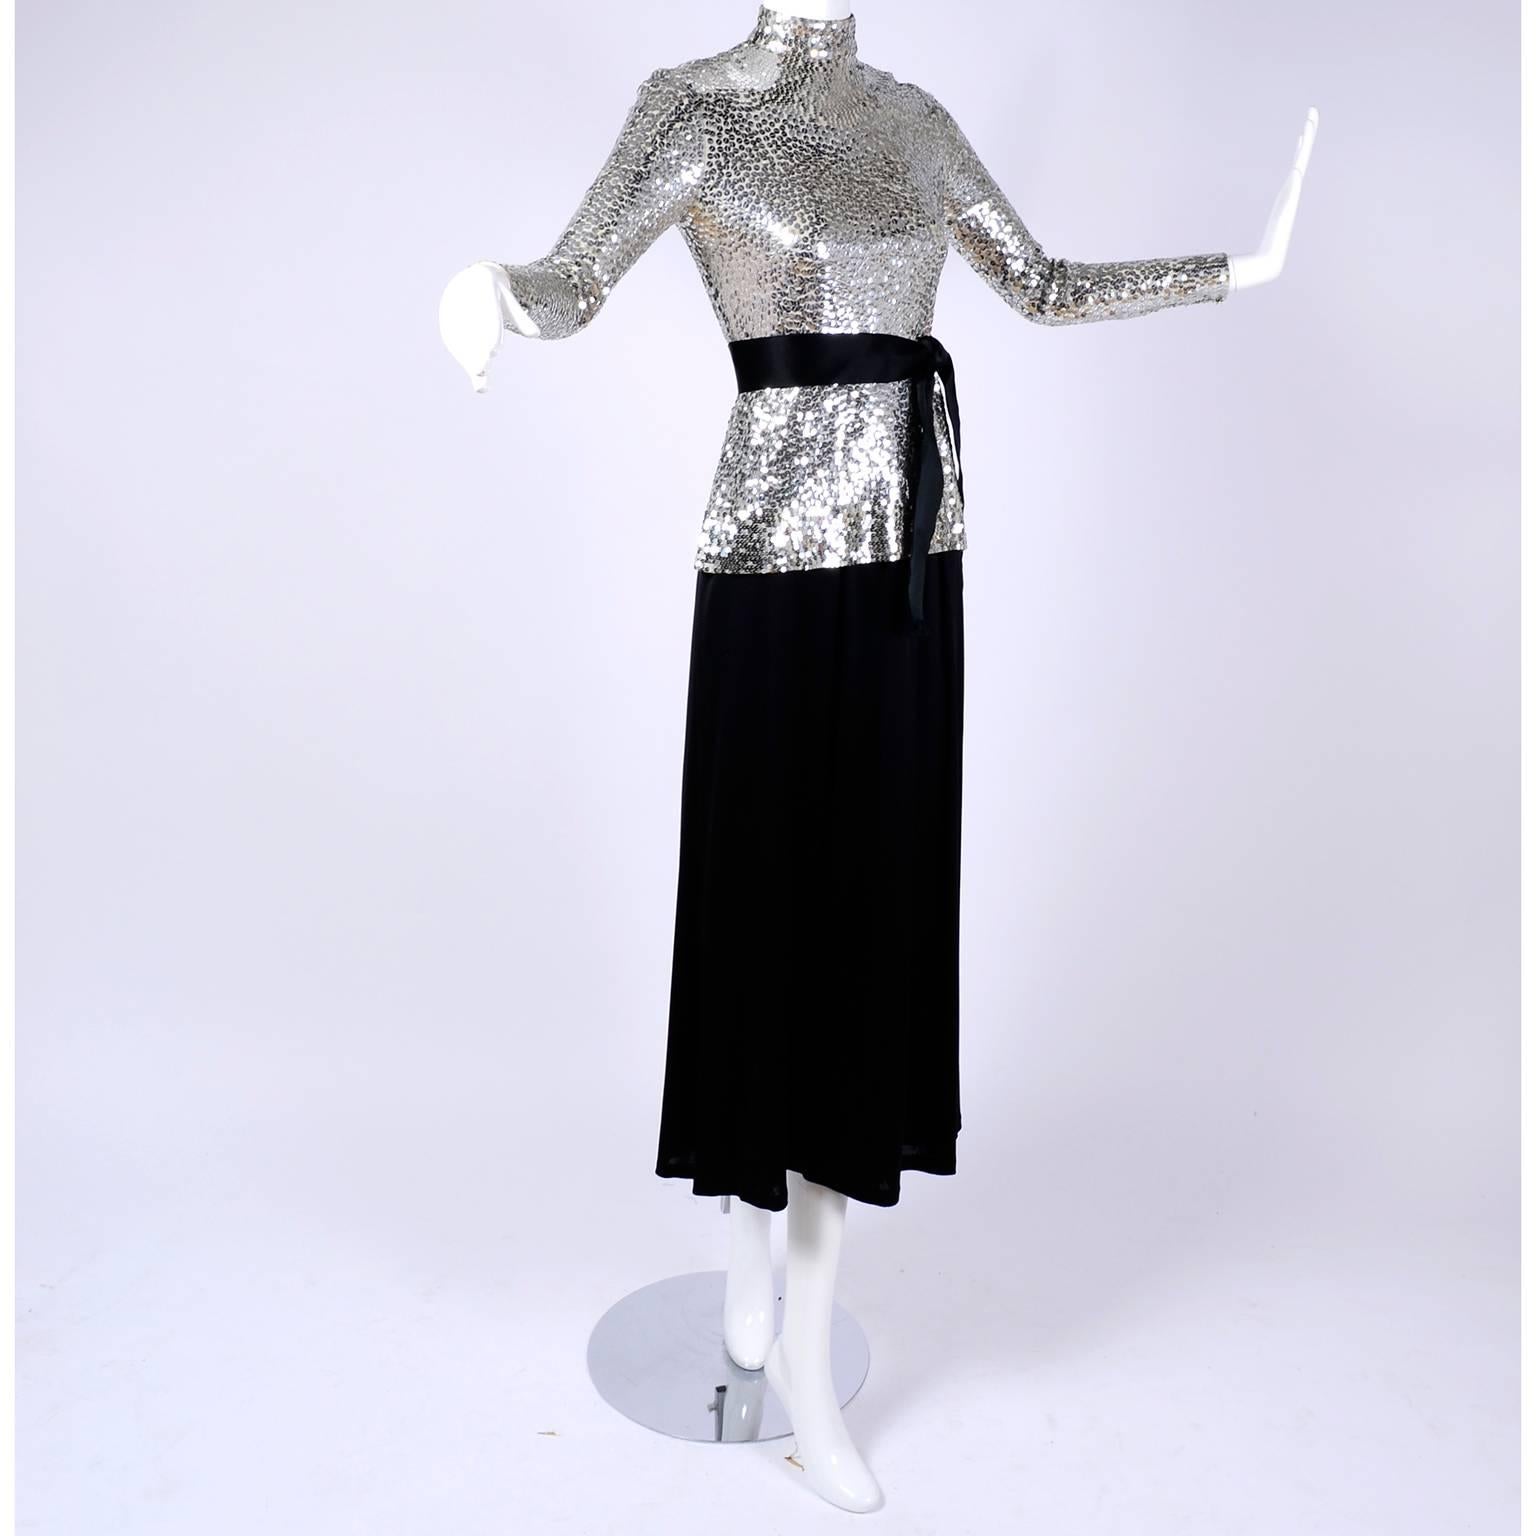 This vintage 2 piece dress was designed by Norman Norell. The long sleeved top is covered in brilliant silver sequins and it is paired with a simple black skirt. Please press 